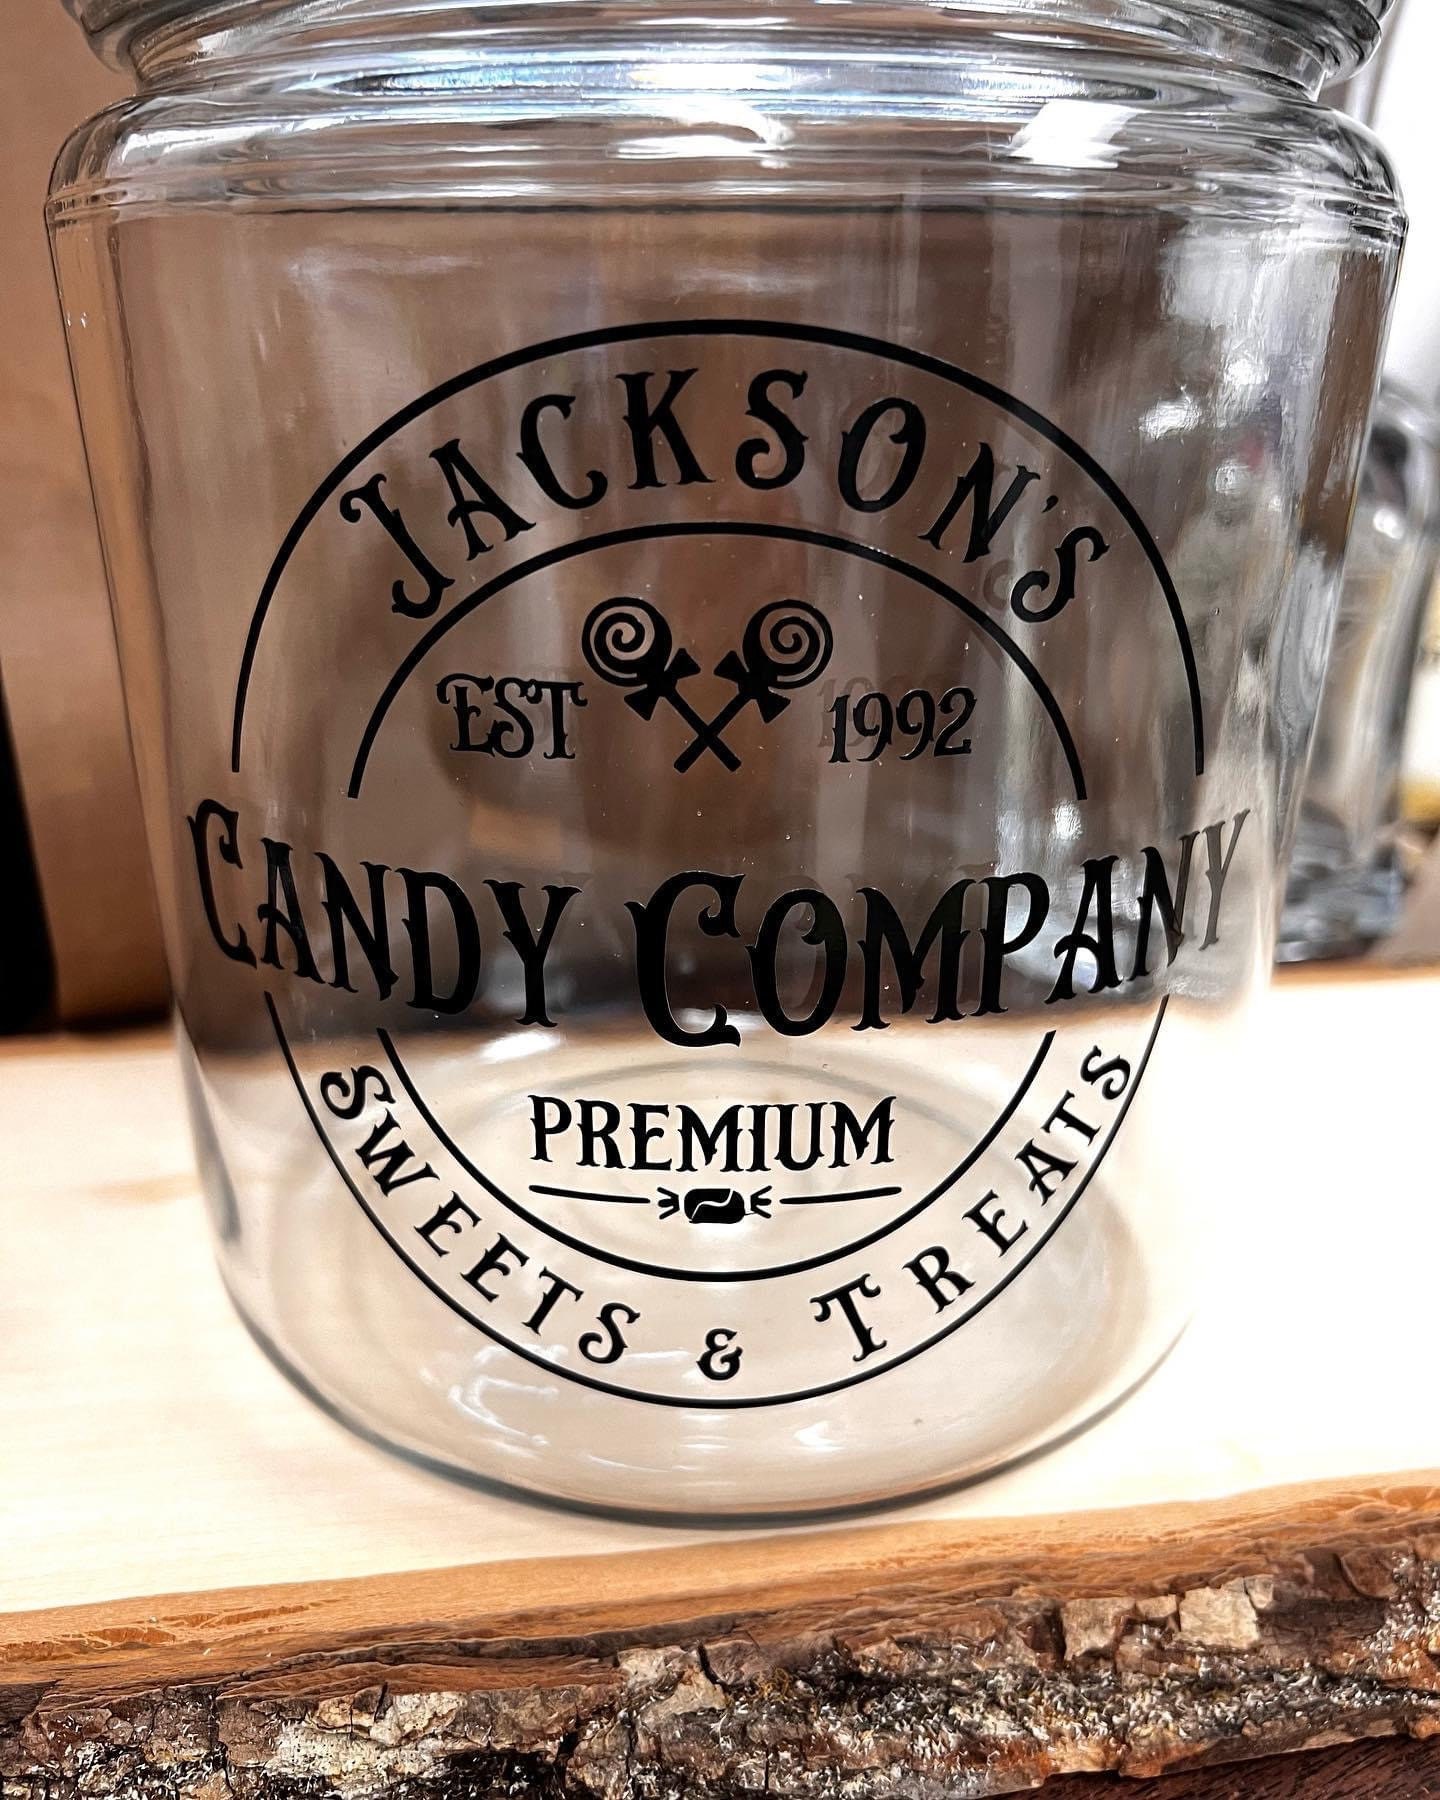 Clear Candy Jars with Lids - Set of 12 - Wedding Birthday Party Apothecary  Jar Plastic Favor Containers - MW70033